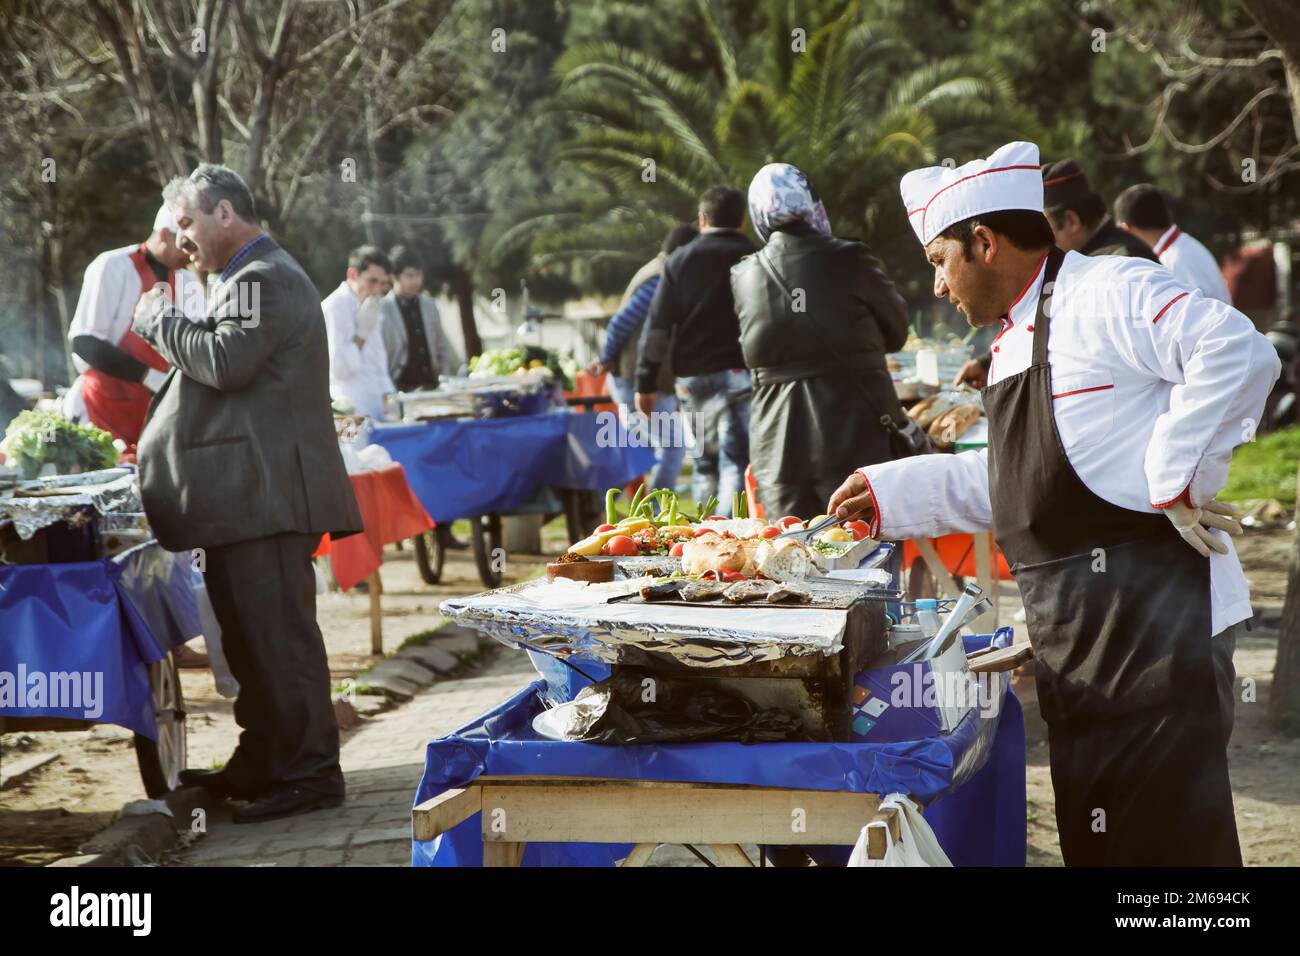 ISTANBUL, TURKEY, MARCH 19, 2013: Vendors selling grilled fish in a park around Karakoy, Istanbul, Turkey. Stock Photo